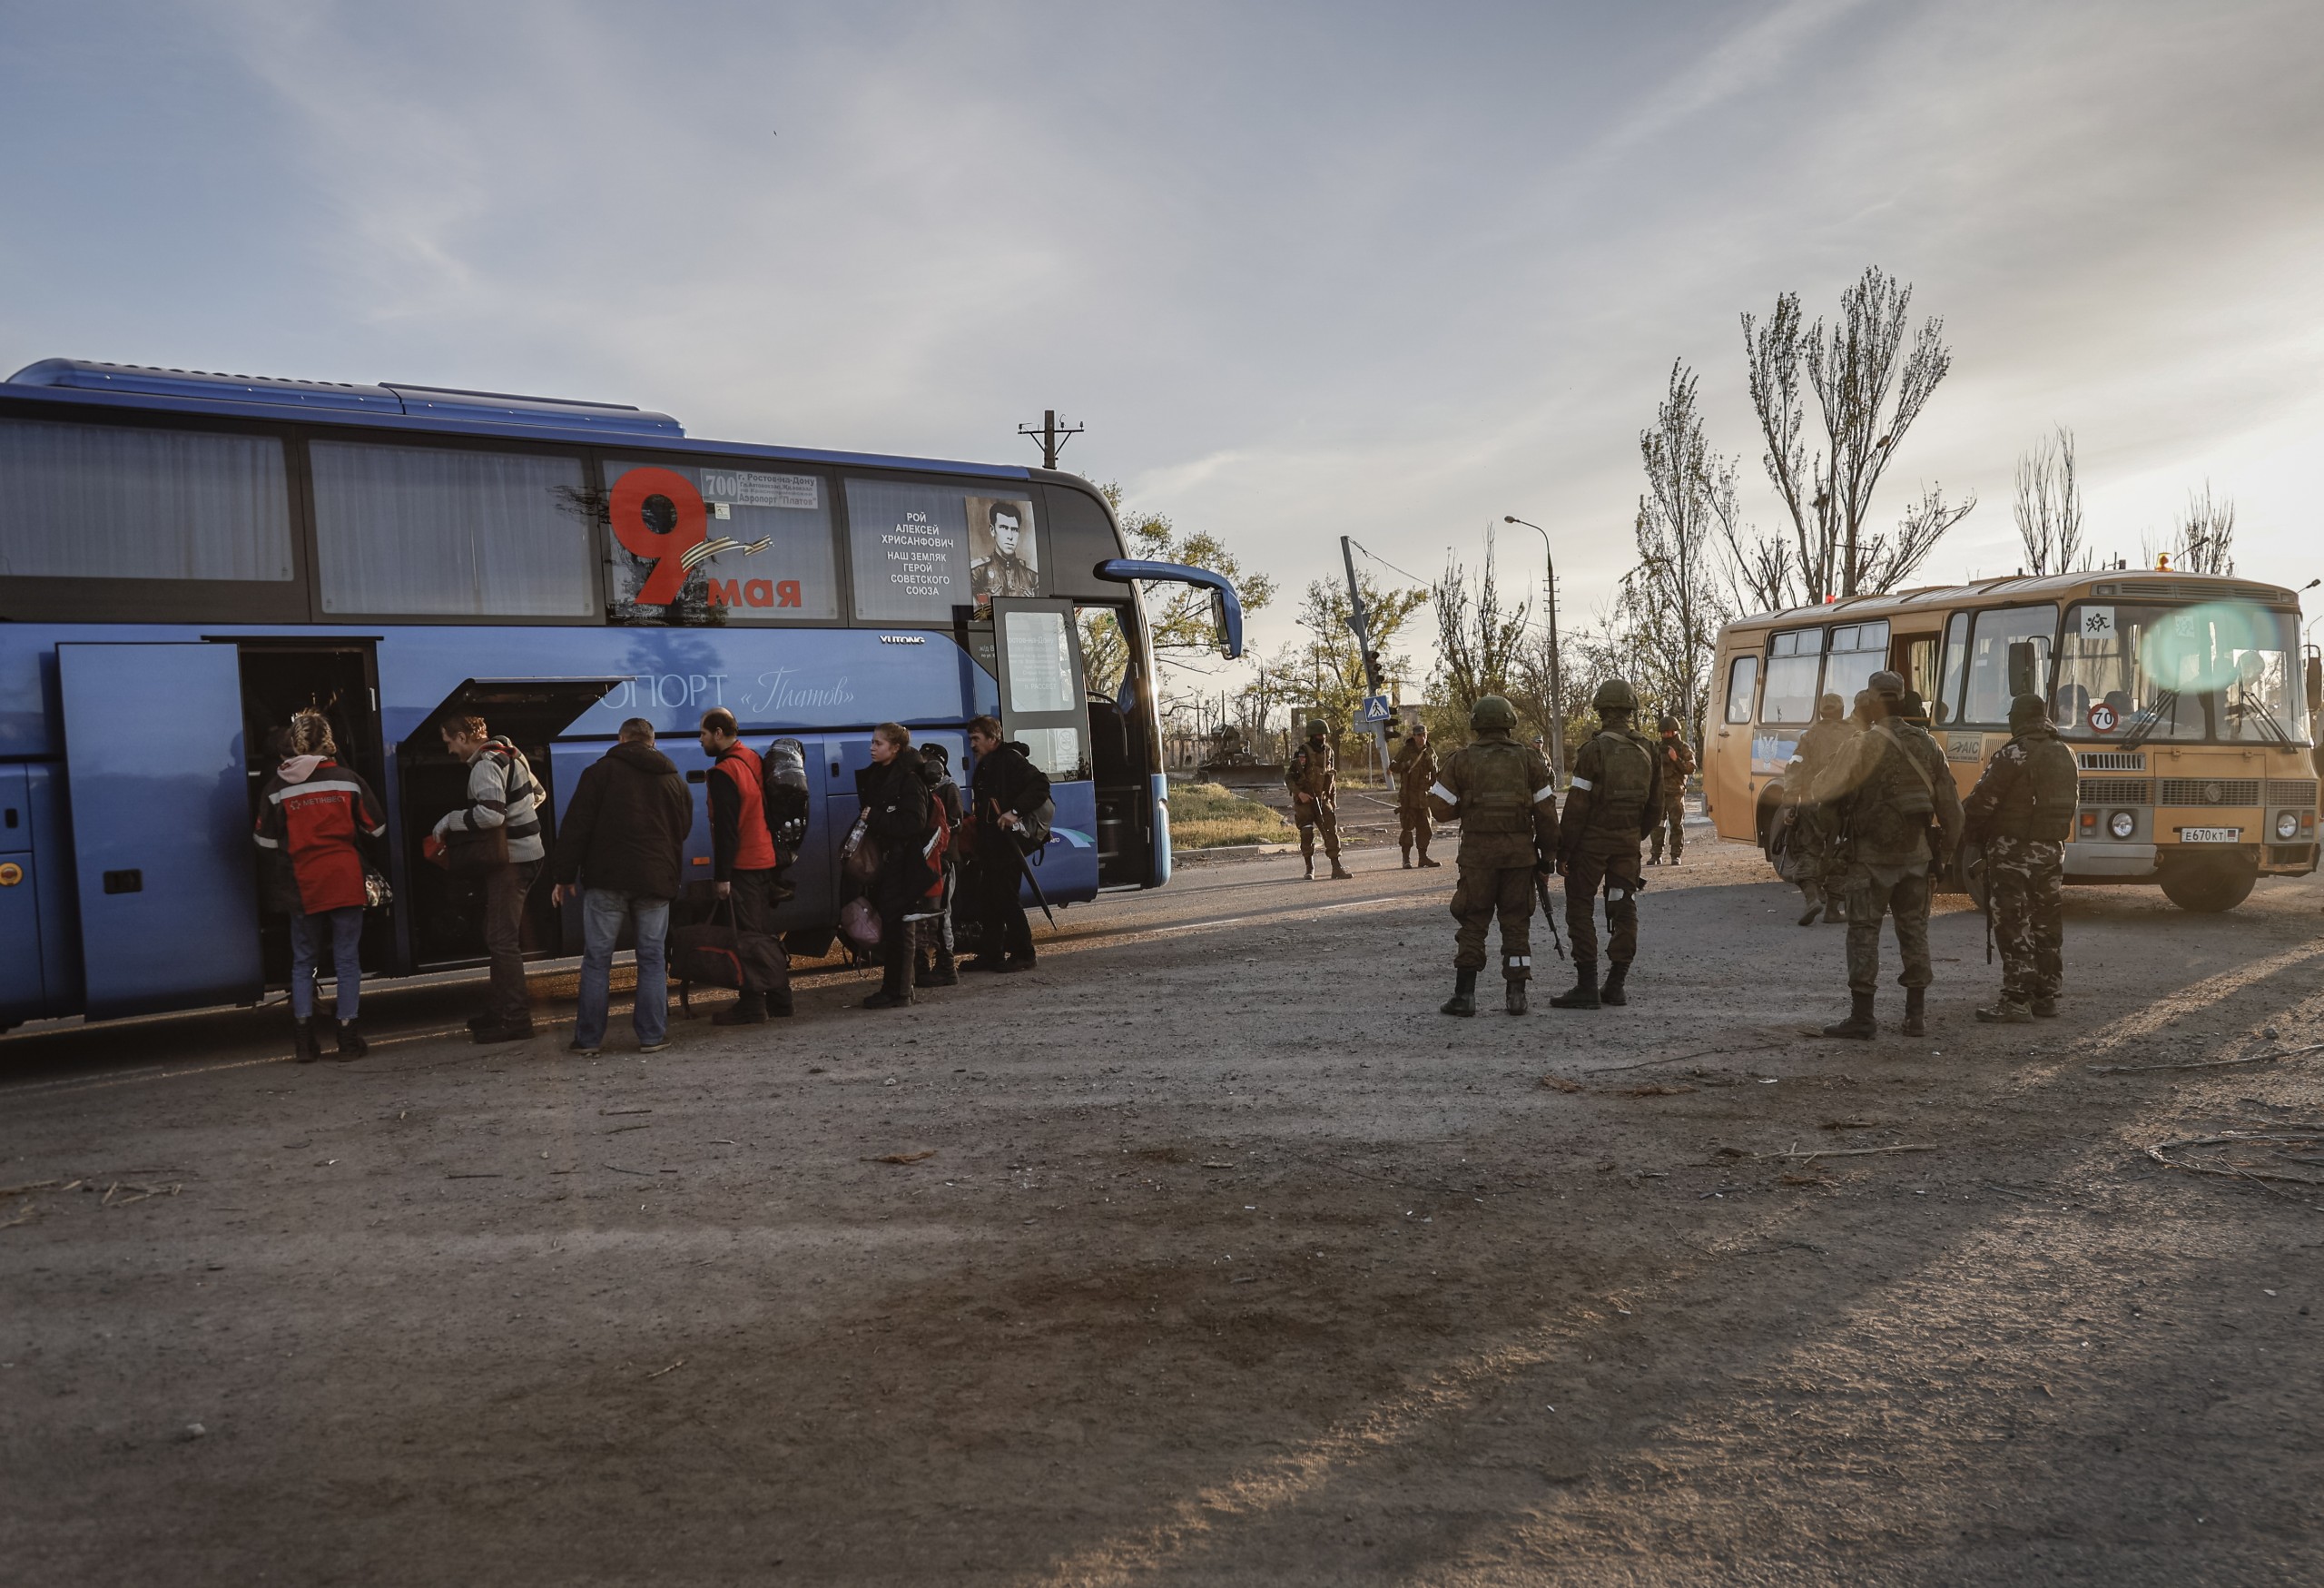 epa09930809 Russian servicemen control the boarding of a bus by the civilian people who were evacuated from Azovstal in Mariupol, Ukraine, 06 May 2022.  According to the Interdepartmental Coordinating Headquarters of the Russian Federation for Humanitarian Response, 50 civilians, including 11 children, were evacuated from a bomb shelter at the Azovstal plant. On 24 February, Russian troops had entered Ukrainian territory in what the Russian president declared a 'special military operation', resulting in fighting and destruction in the country. According to data released by the United Nations High Commission for the Refugees (UNHCR) on 05 May, over 5.7 million refugees have fled Ukraine seeking safety, protection and assistance in neighboring countries.  EPA/ALESSANDRO GUERRA